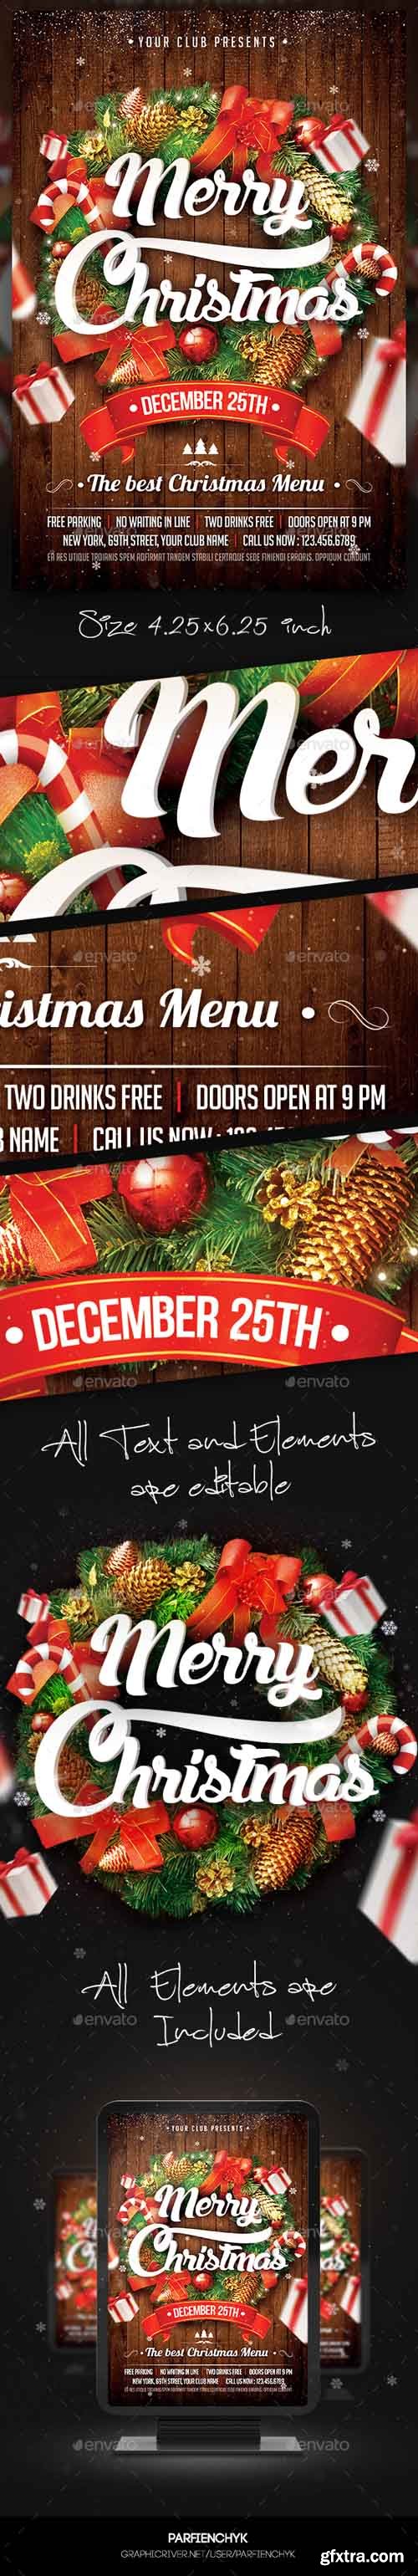 GR - Christmas Party Flyer Template 13746216